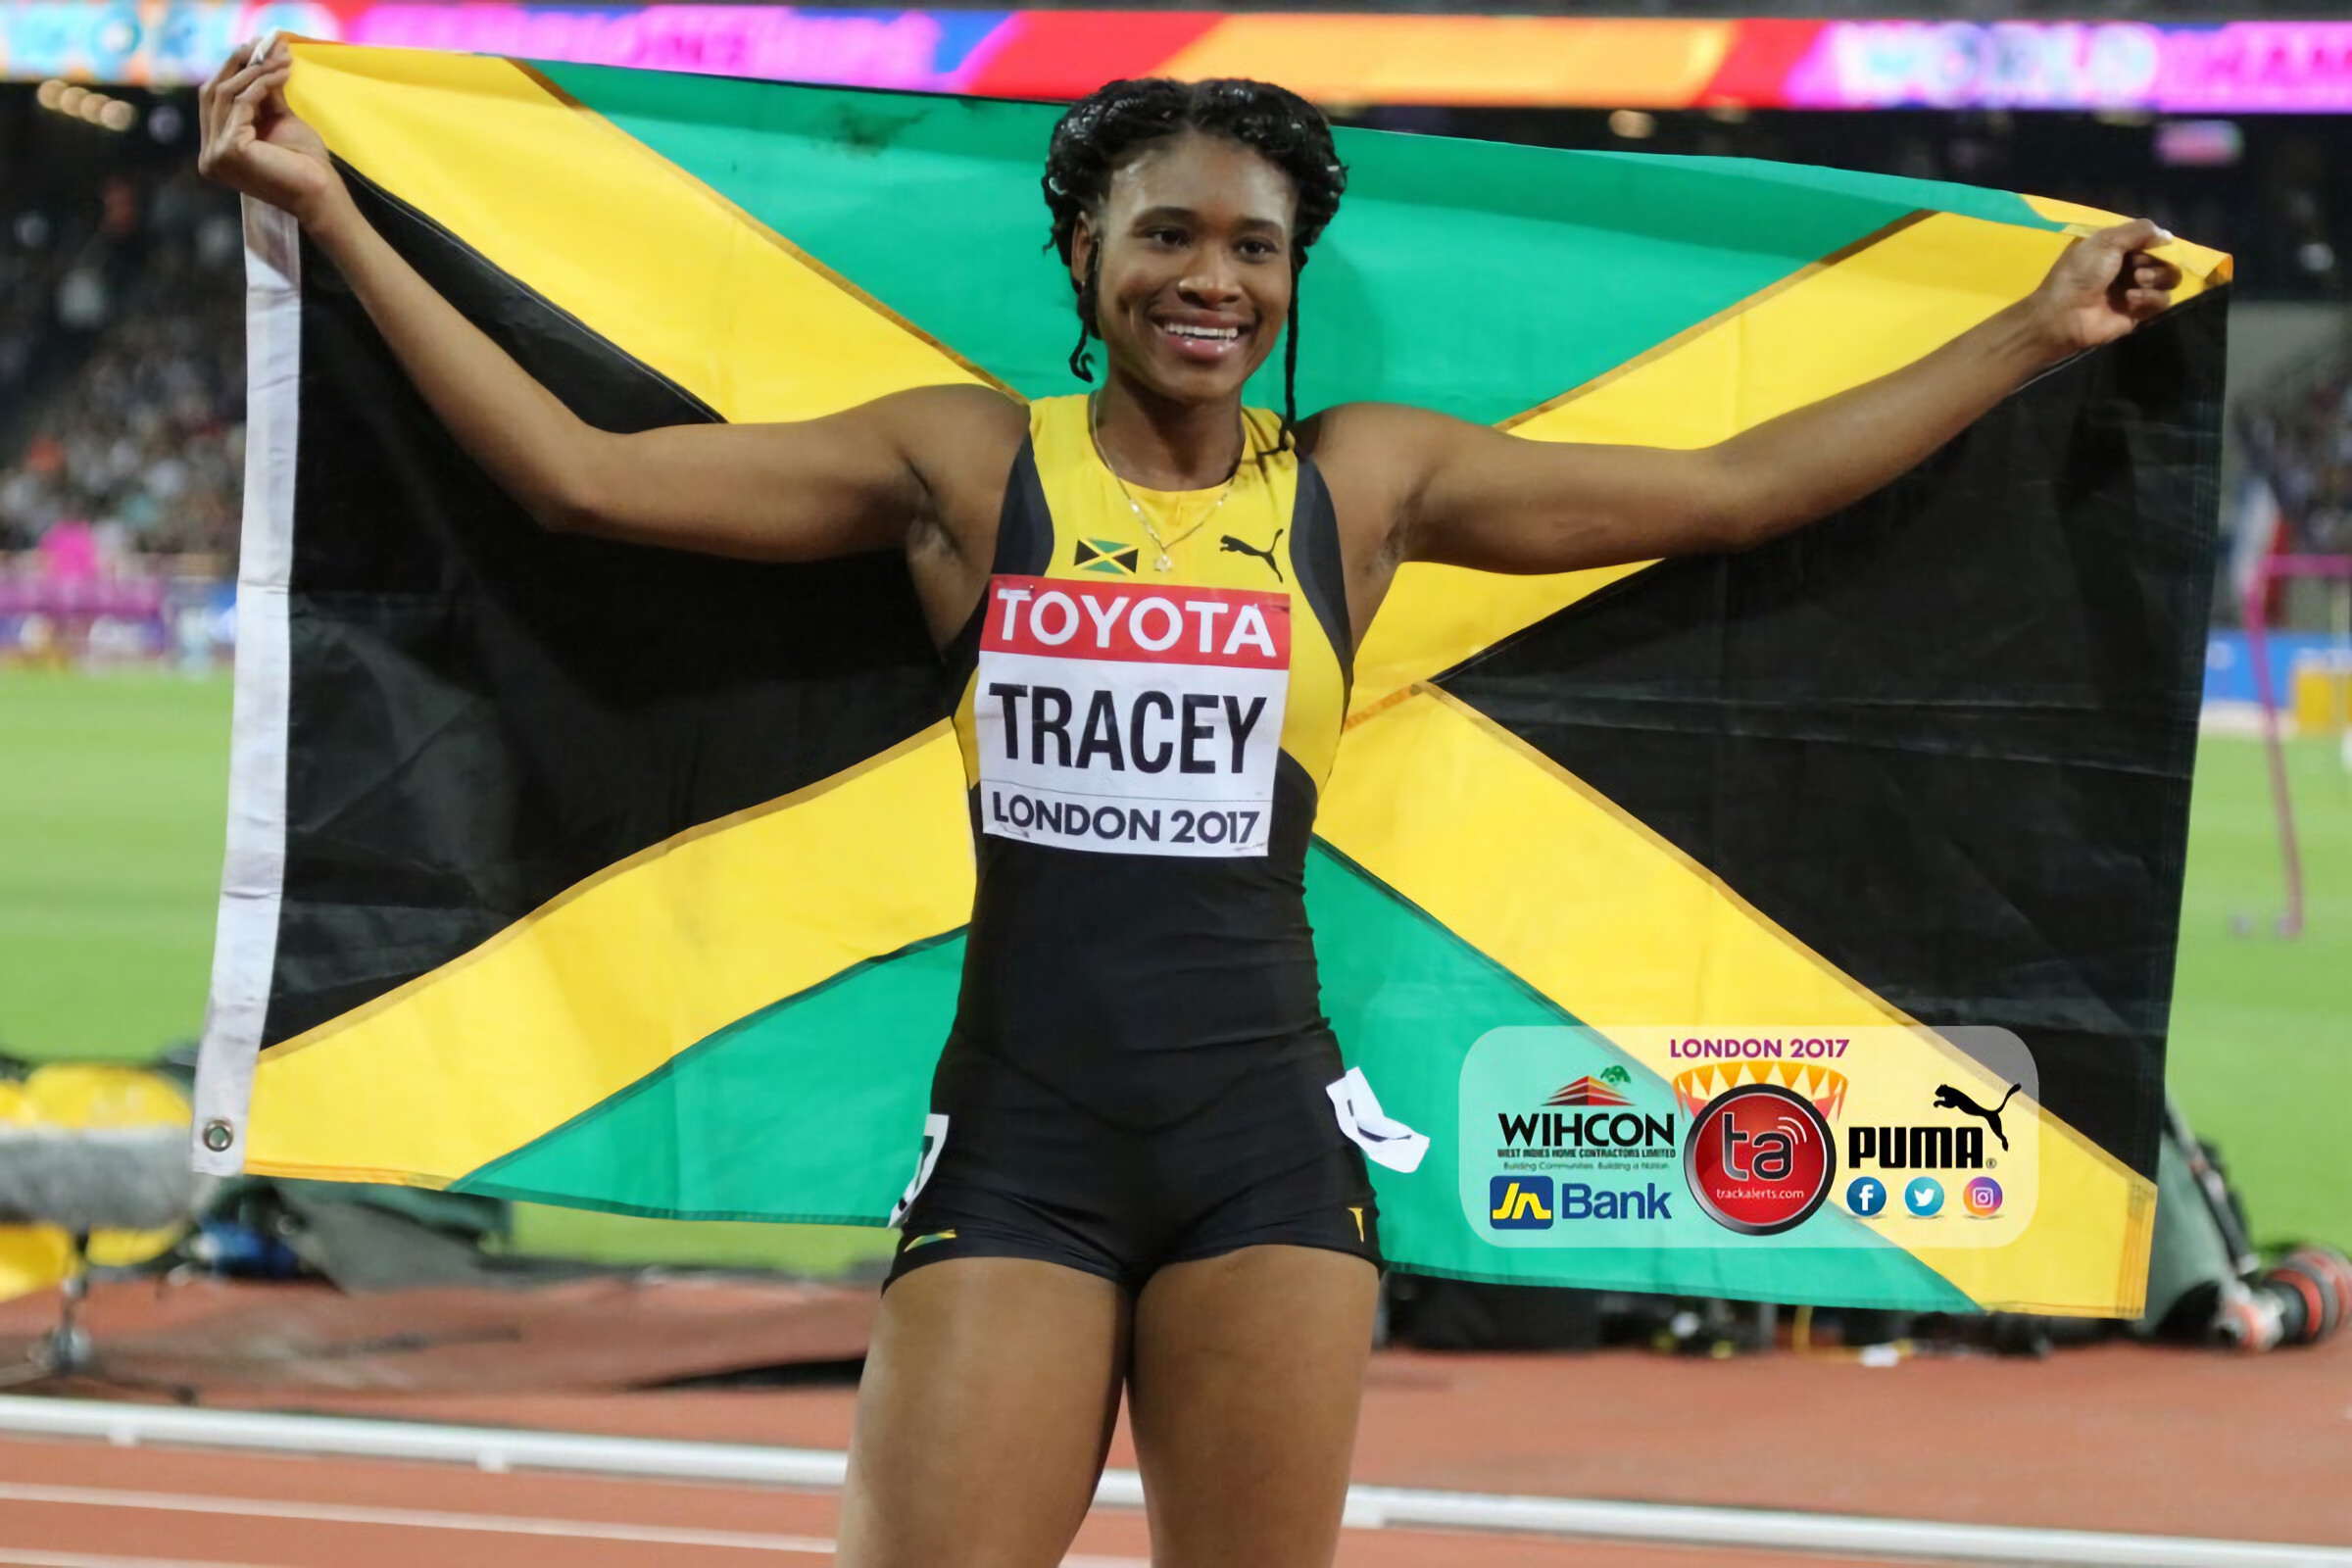 Ristananna Tracey, Hurdling queen, Track and field star, Olympic aspirations, 2400x1600 HD Desktop